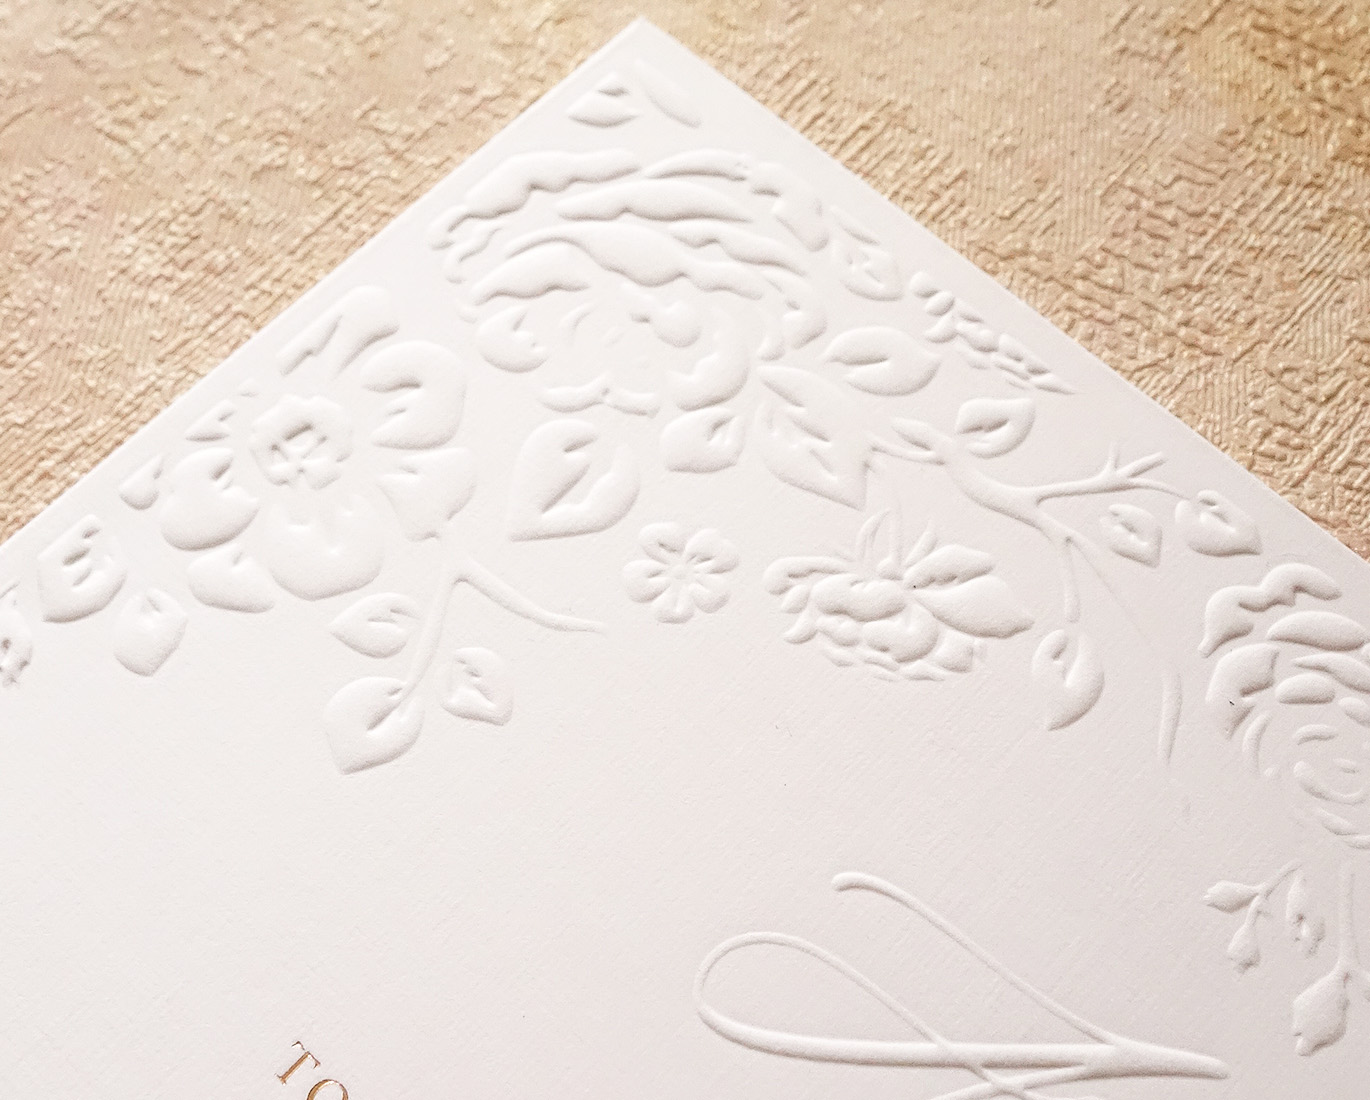 special finishing emboss papermint custom wedding invitation and stationery design